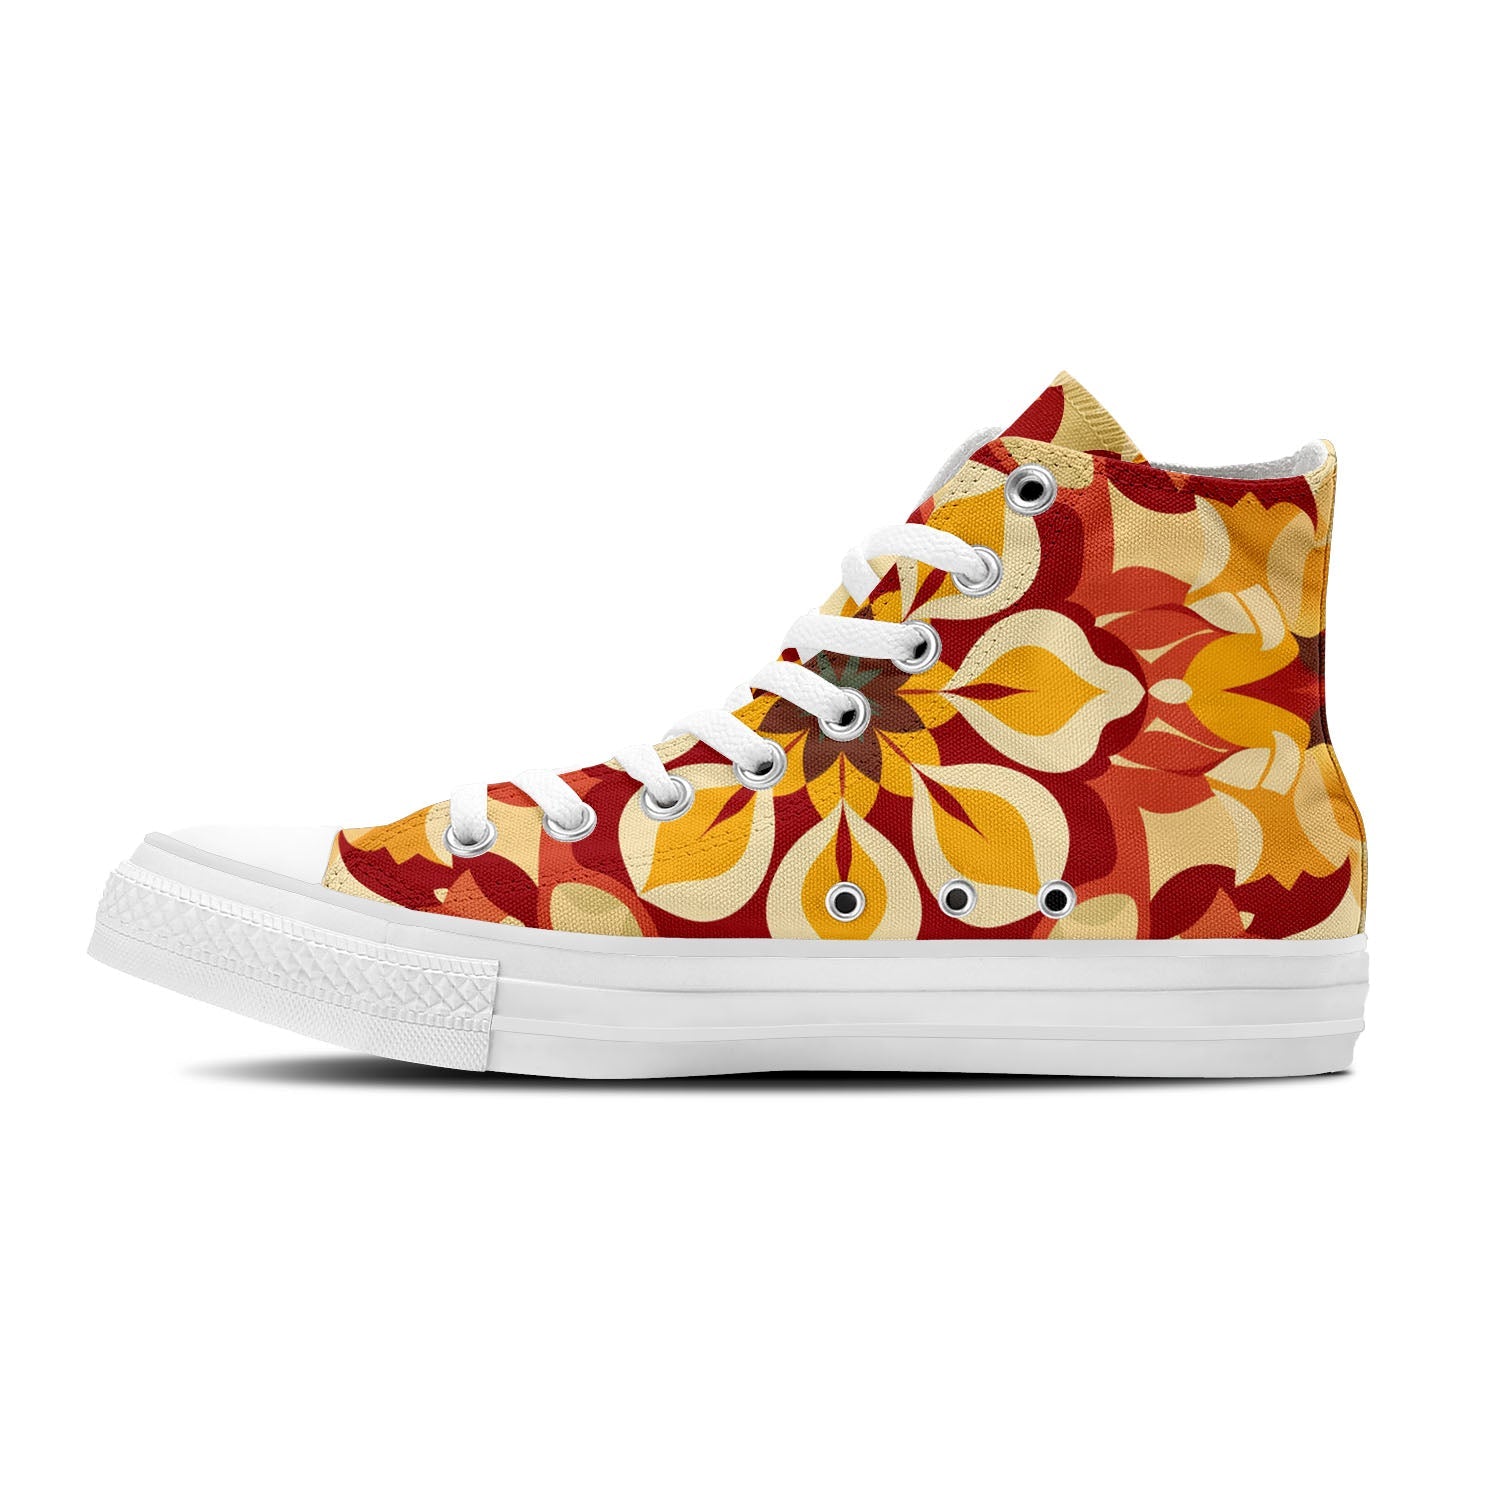 Walk the streets in unparalleled style with our Mid-Cut Canvas Shoes, featuring intricate Moroccan-inspired patterns in a vibrant palette of reds, yellows, and greens